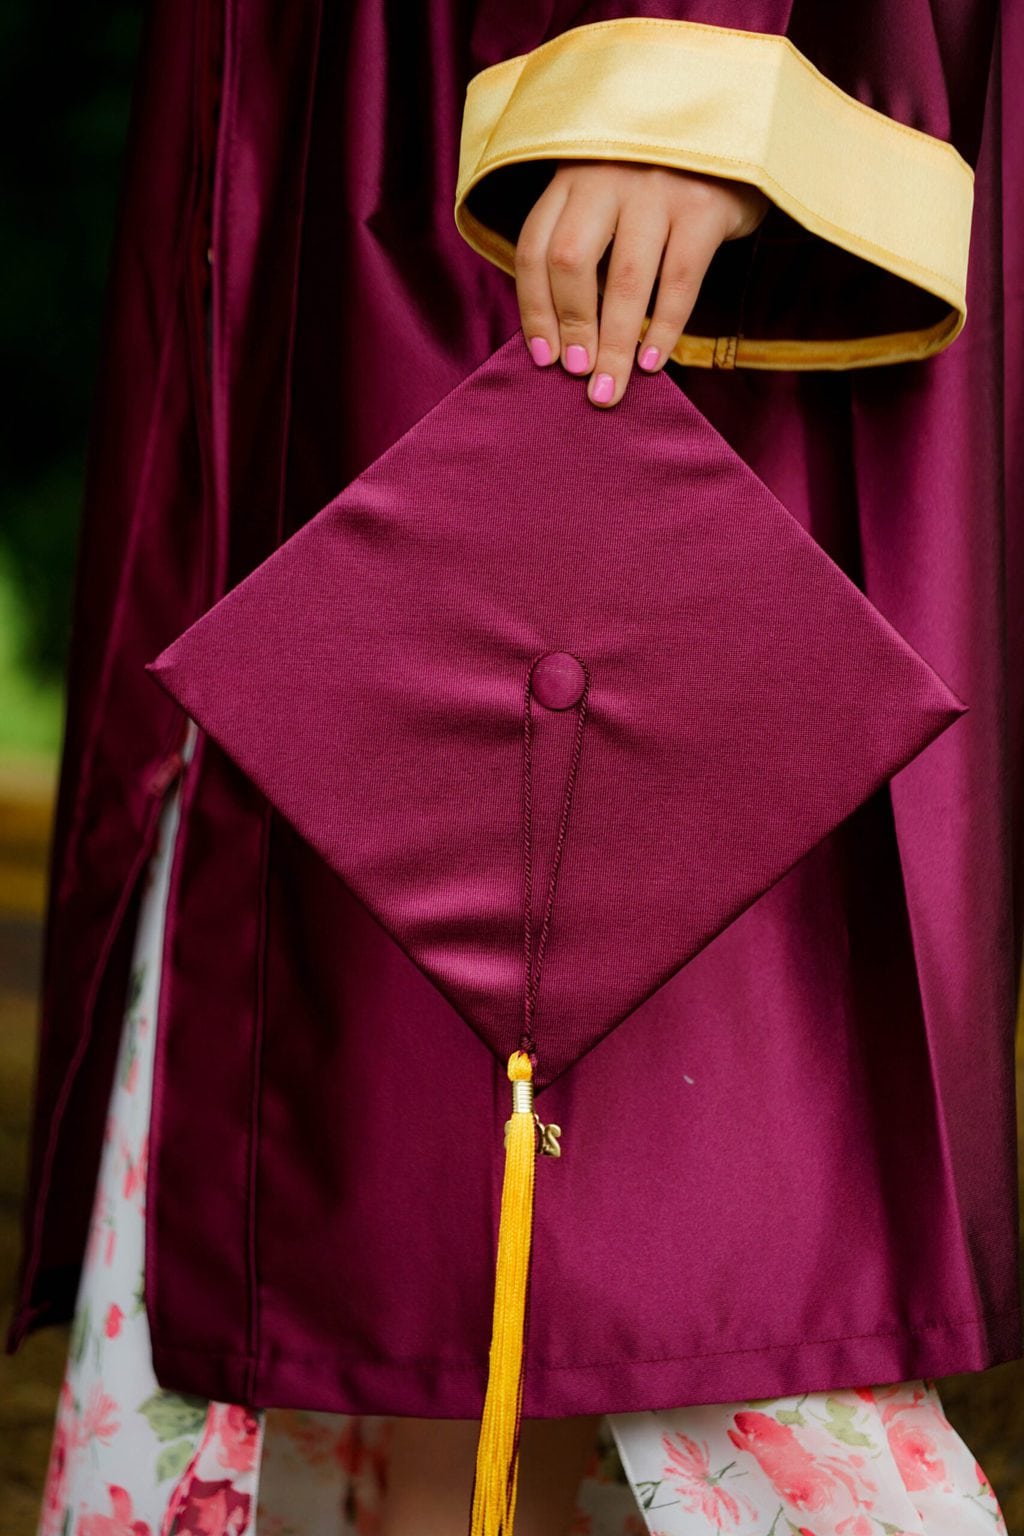 Graduation image of a woman in a graduation gown holding her cap.